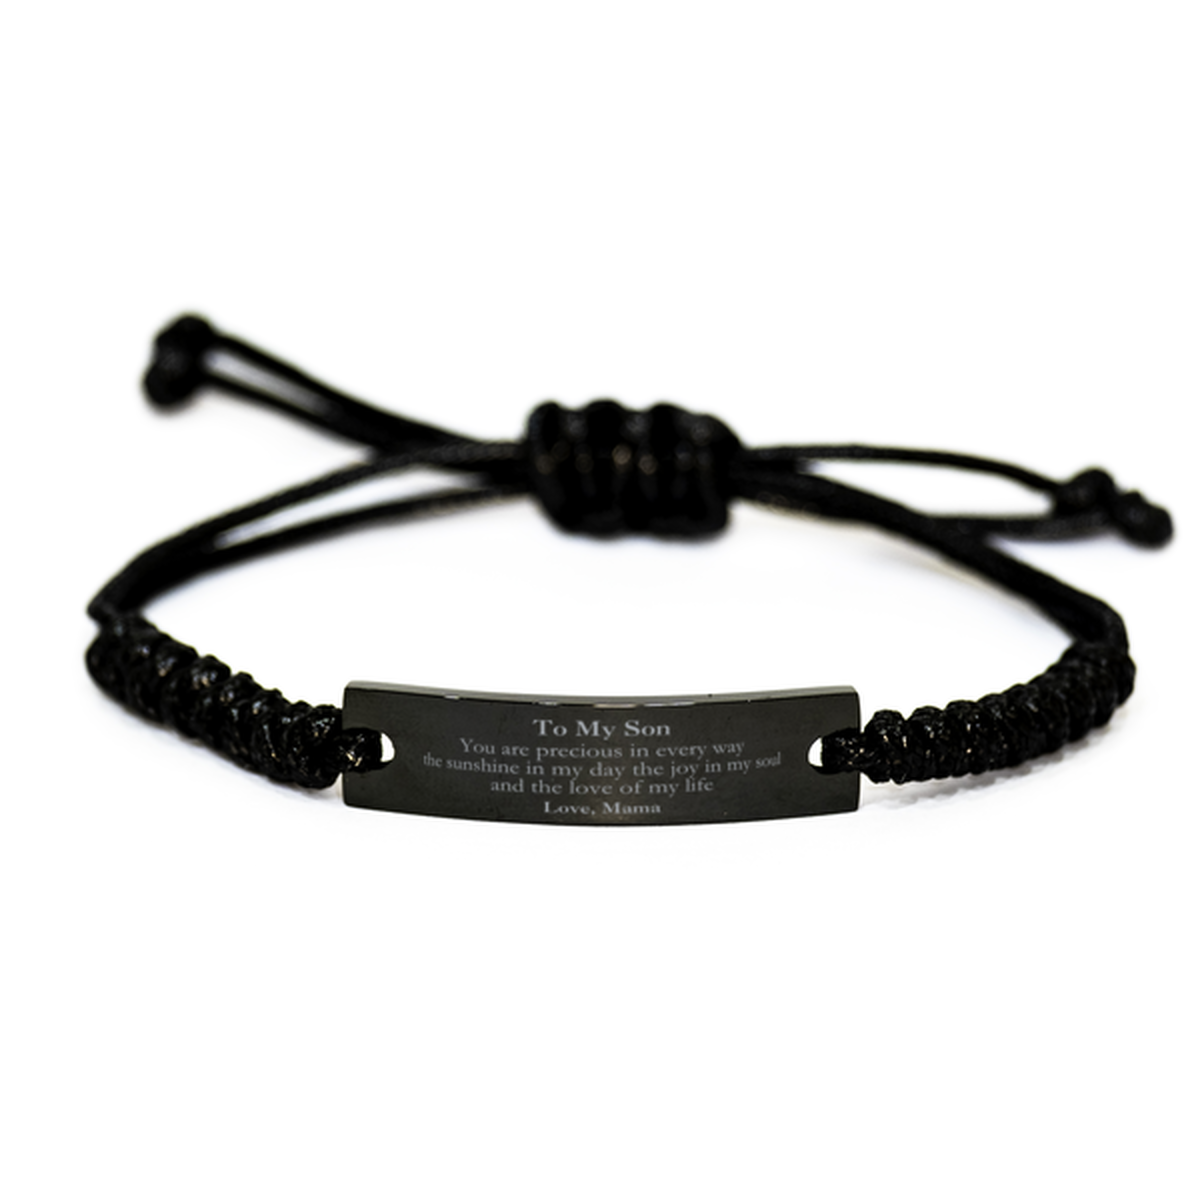 Graduation Gifts for Son Black Rope Bracelet Present from Mama, Christmas Son Birthday Gifts Son You are precious in every way the sunshine in my day. Love, Mama